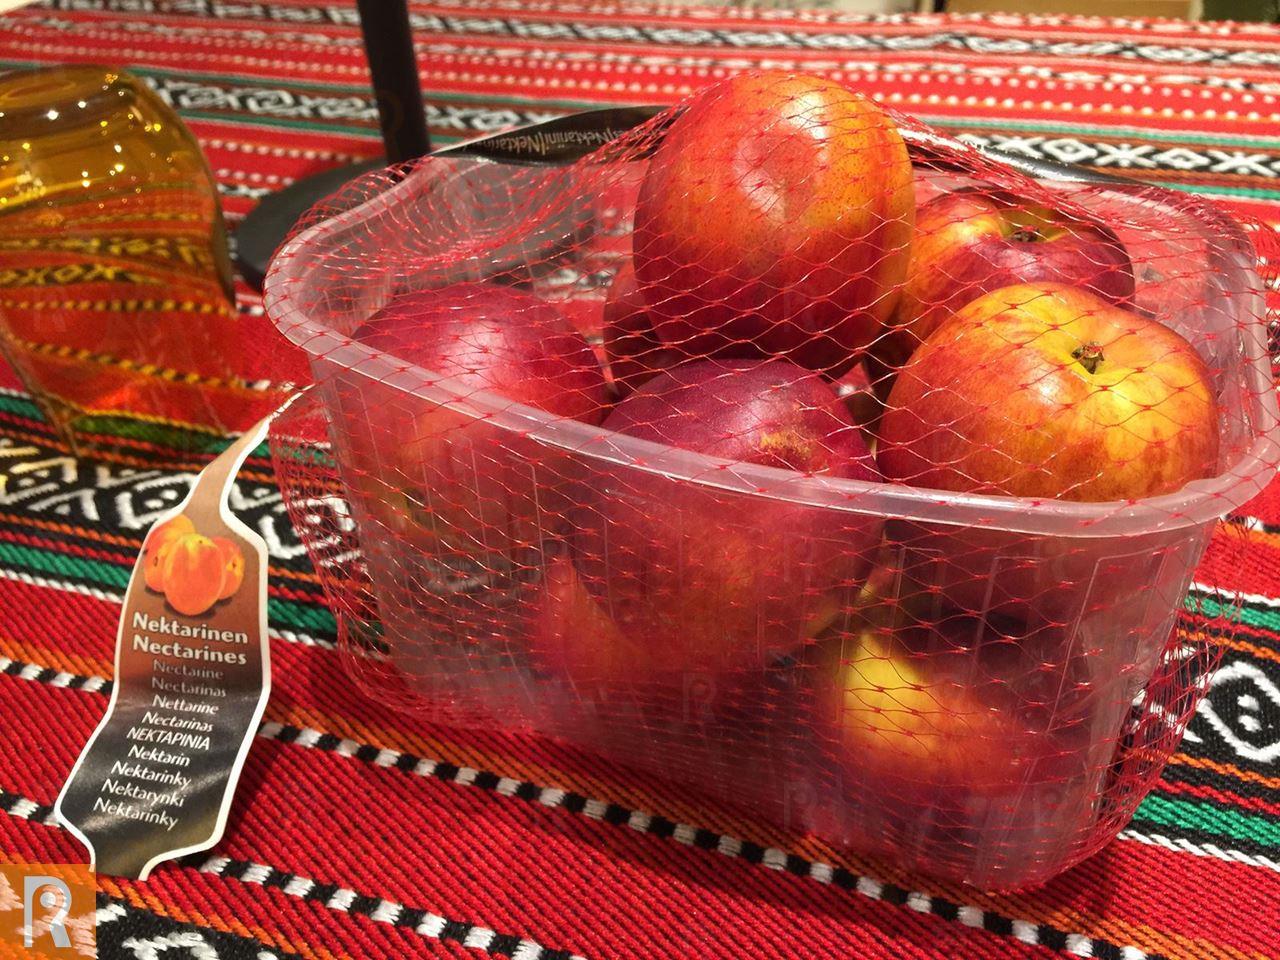 "PEACH GARDEN" Promotes Fresh Peaches in Kuwait for the 2nd consecutive Year